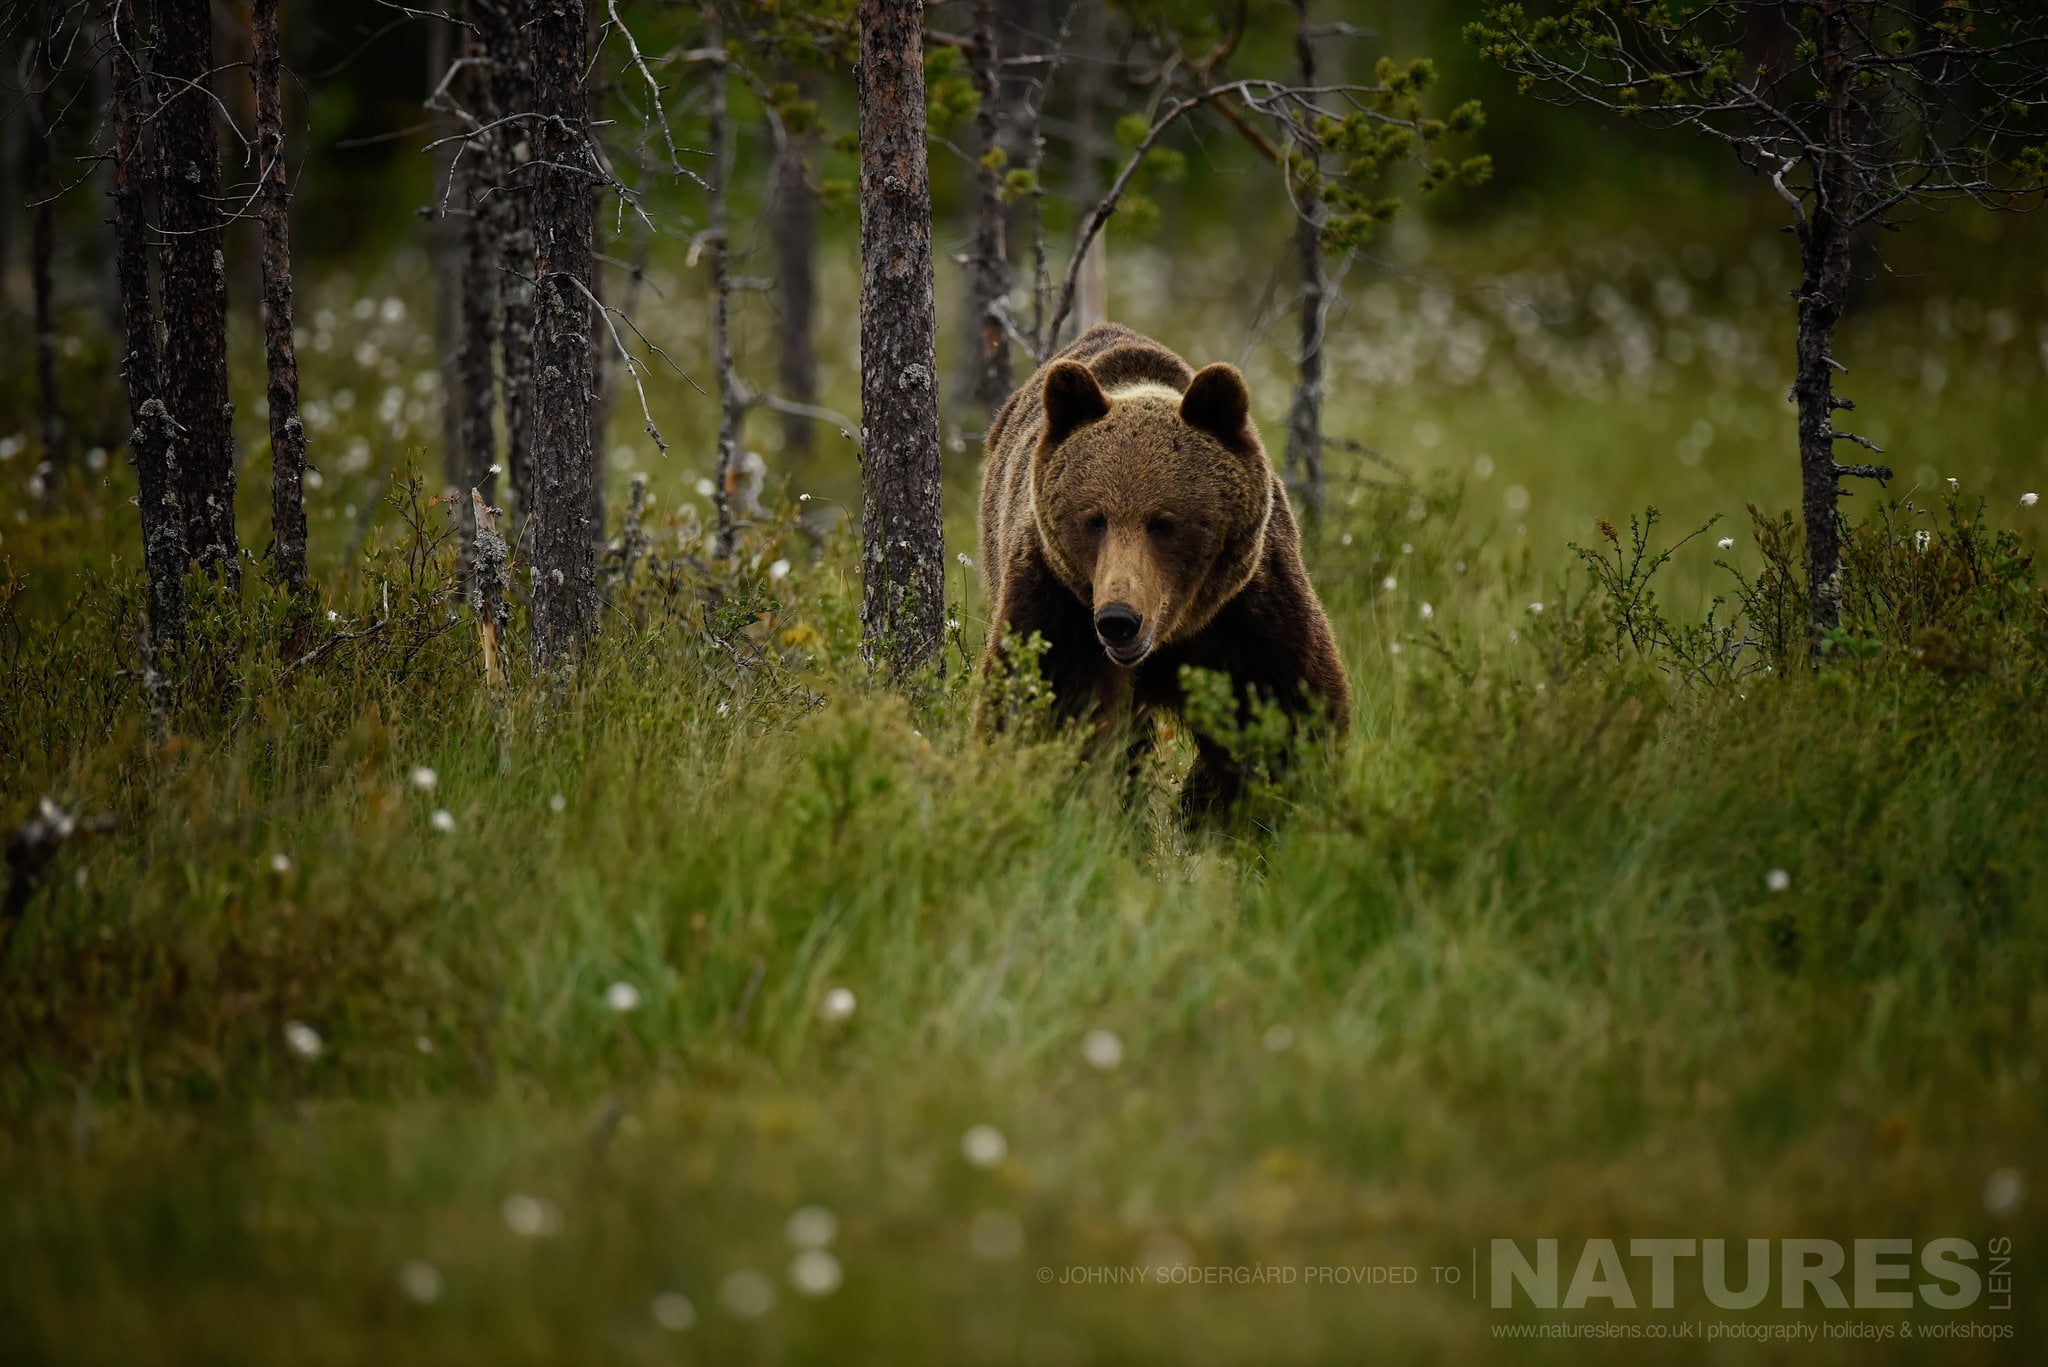 One Of The Large Bears Emerges From The Russian Forests Photographed By Johnny Södergård During The Natureslens Wild Brown Bears Of Finland Photography Holiday